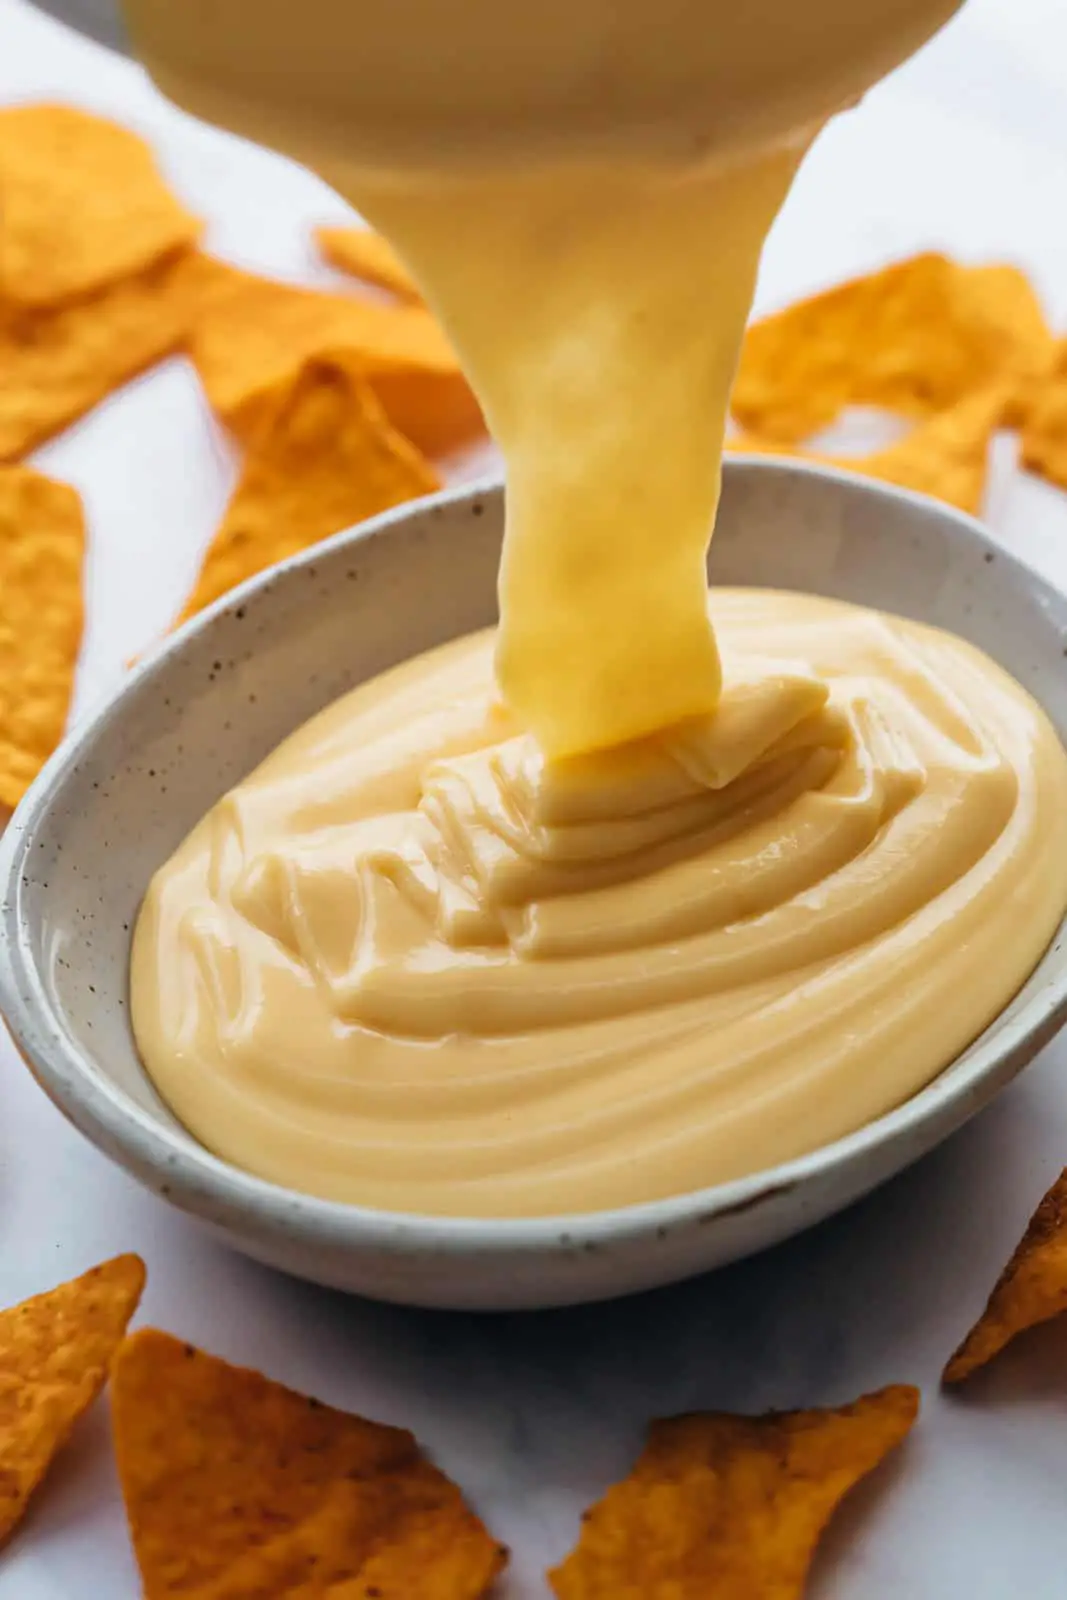 Spicy Nacho Cheese Sauce in just 10 Minutes!